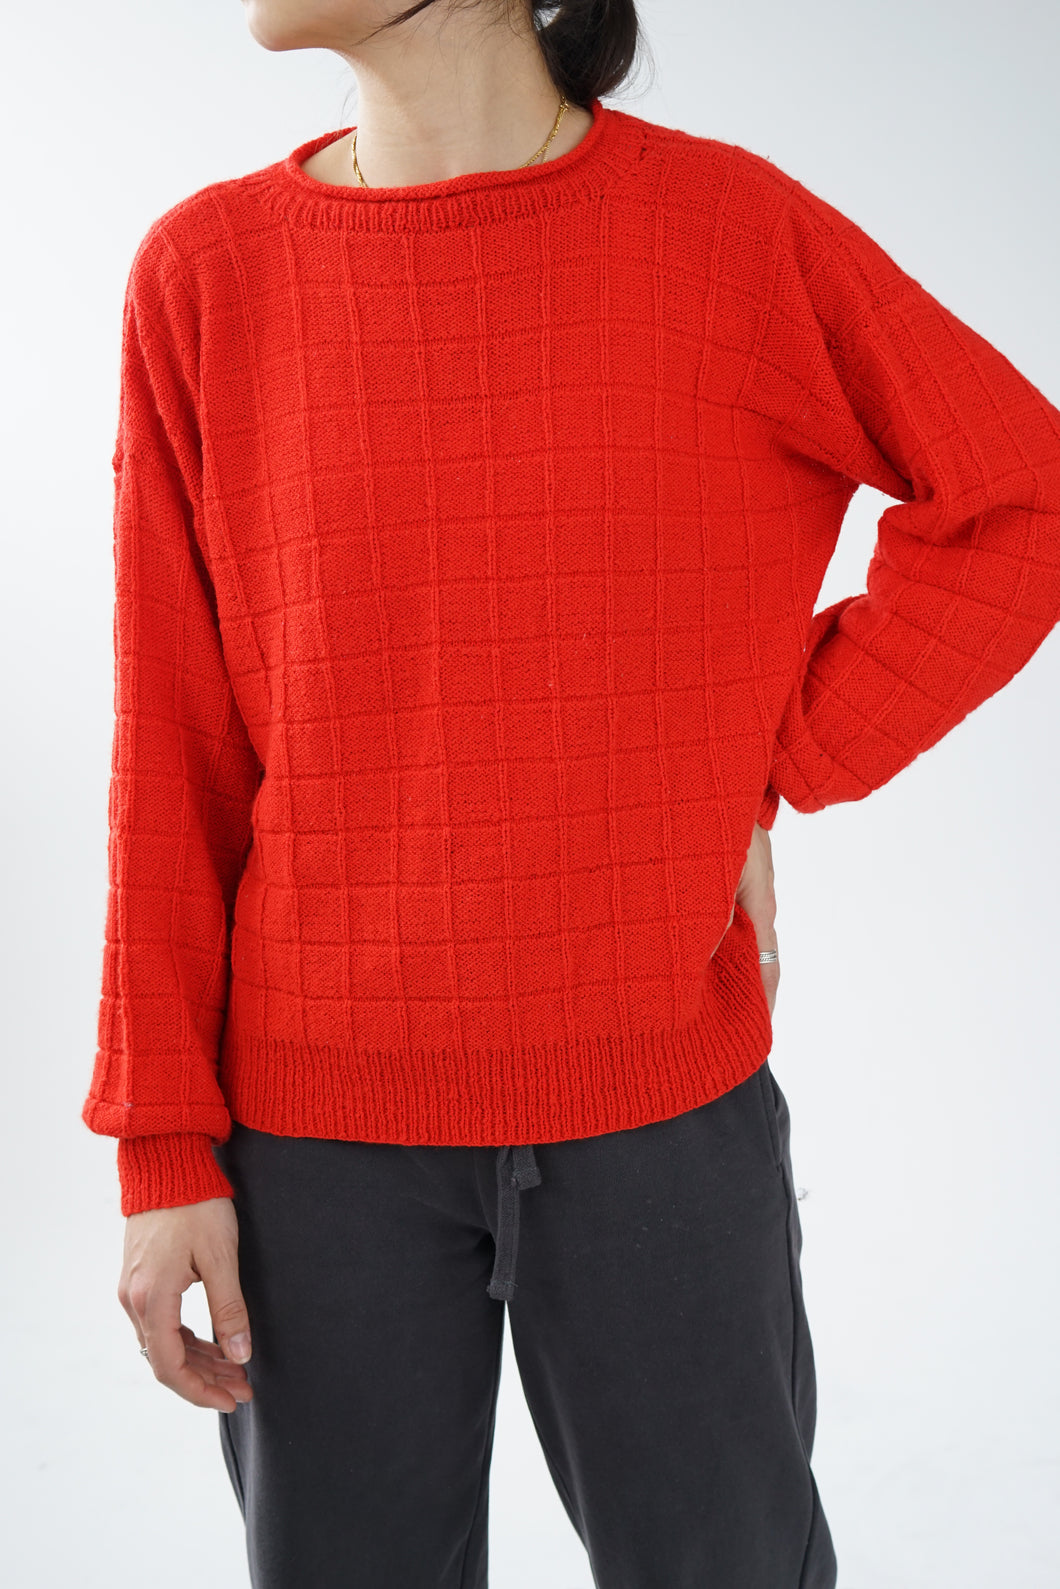 Handmade red knit sweater for women size S